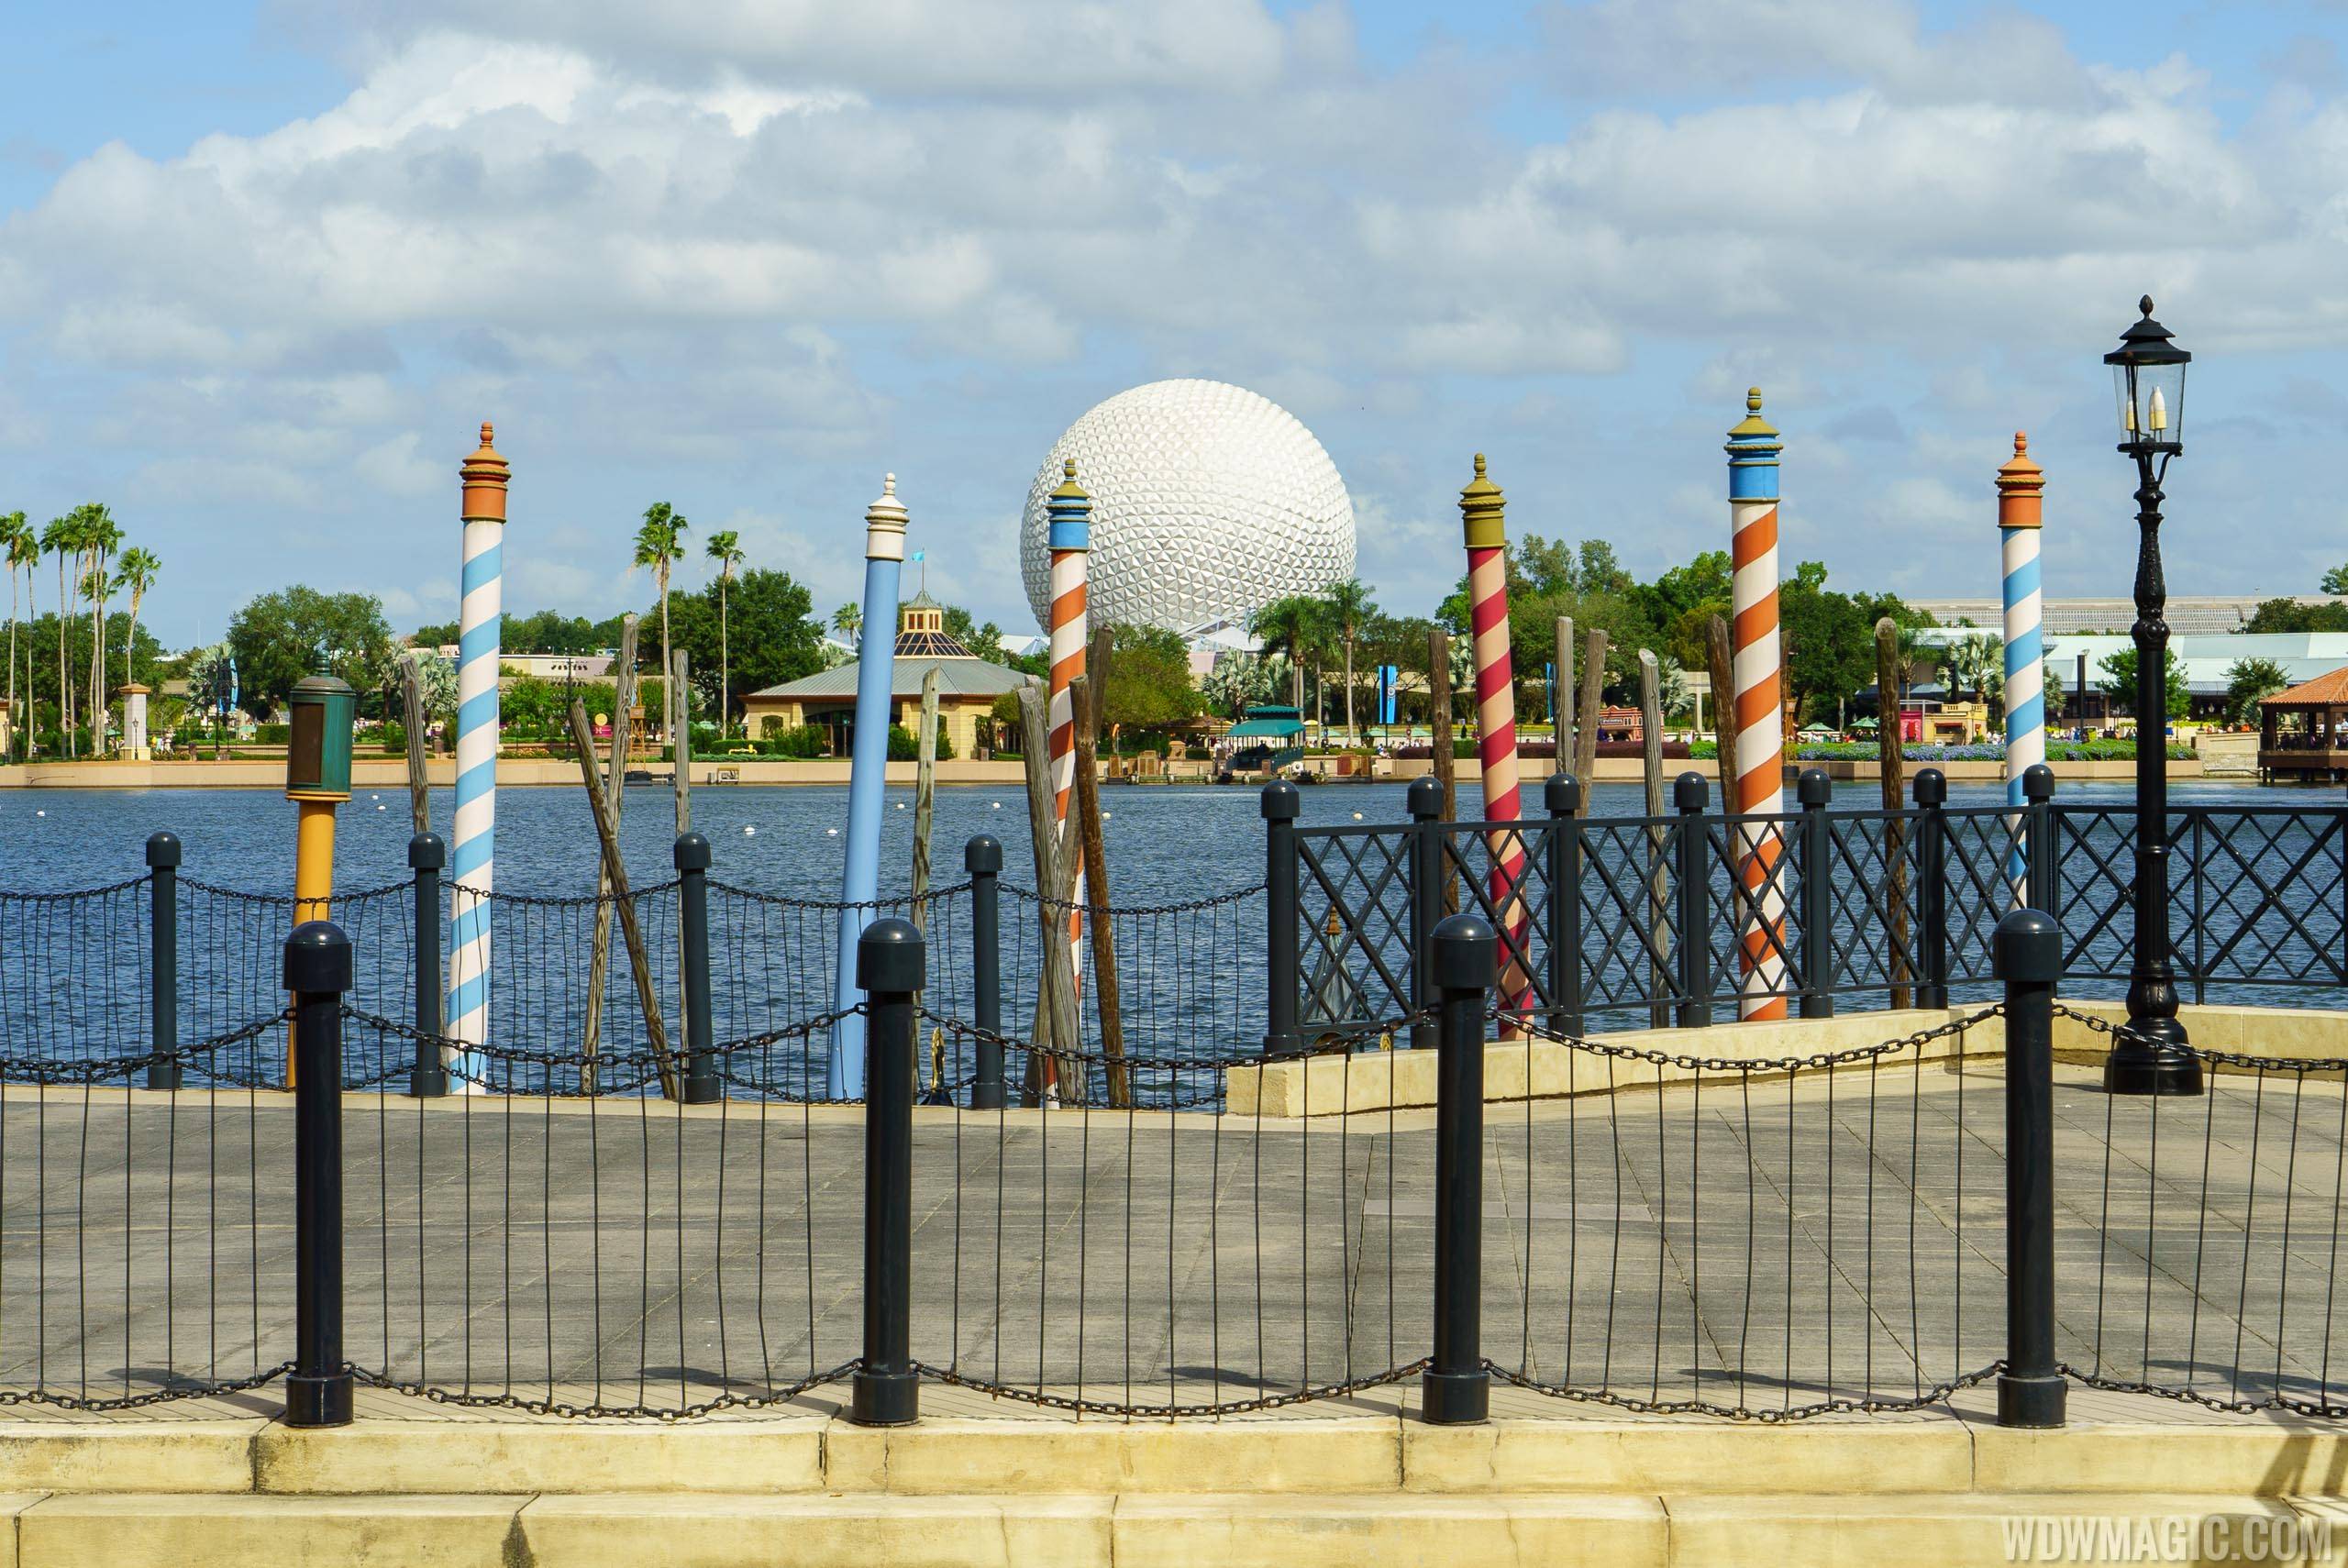 New speciality cruise takes guests around World Showcase Lagoon